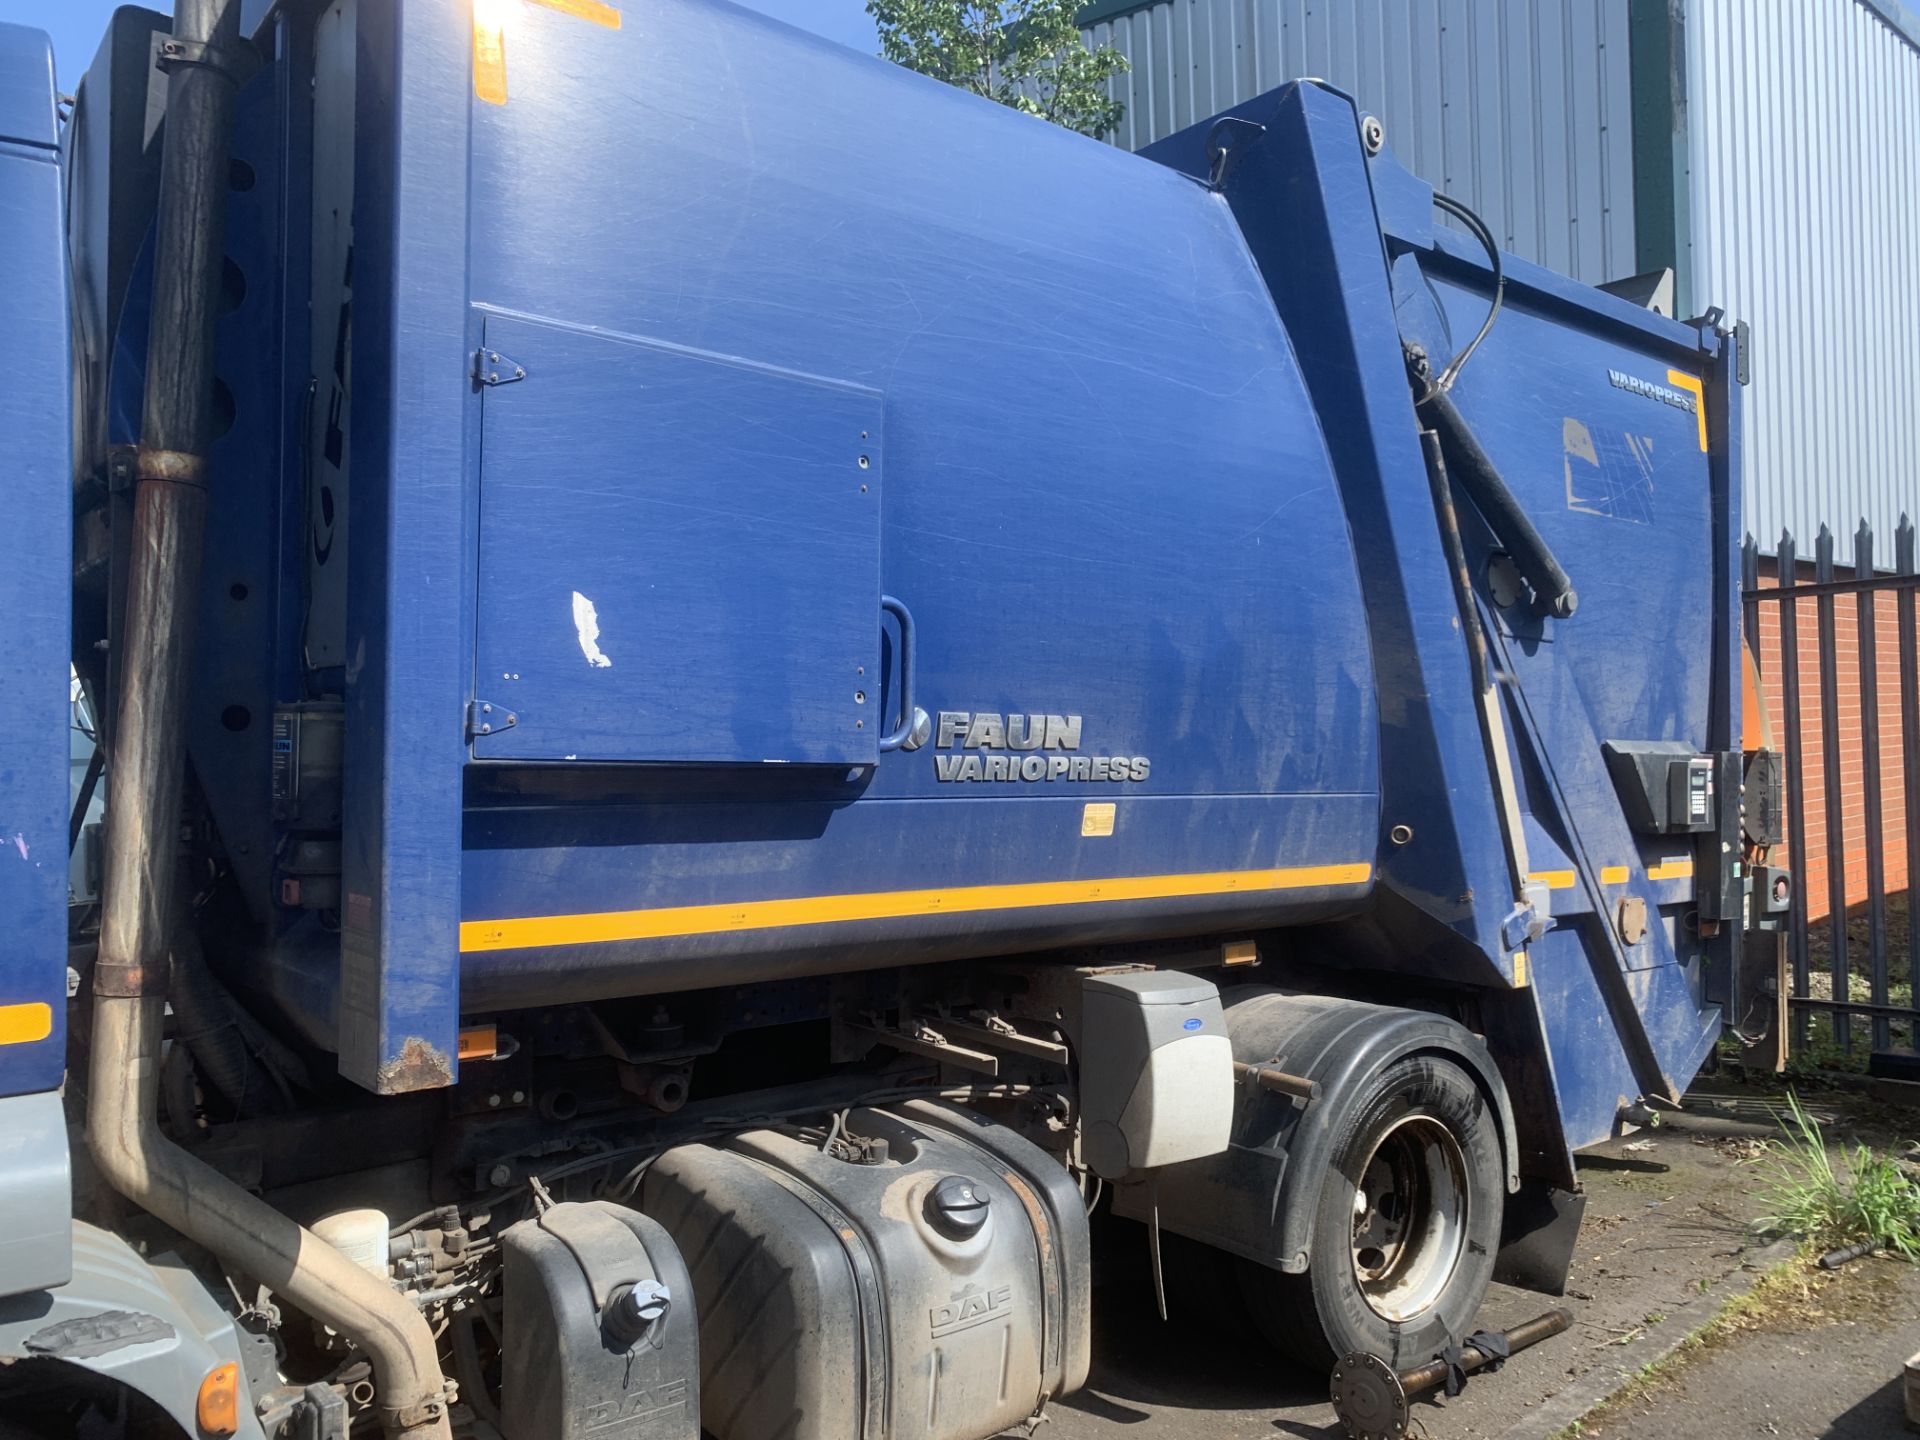 2013 BLUE DAF TRUCKS LF REFUSE COLLECTION VEHICLE - Image 7 of 12